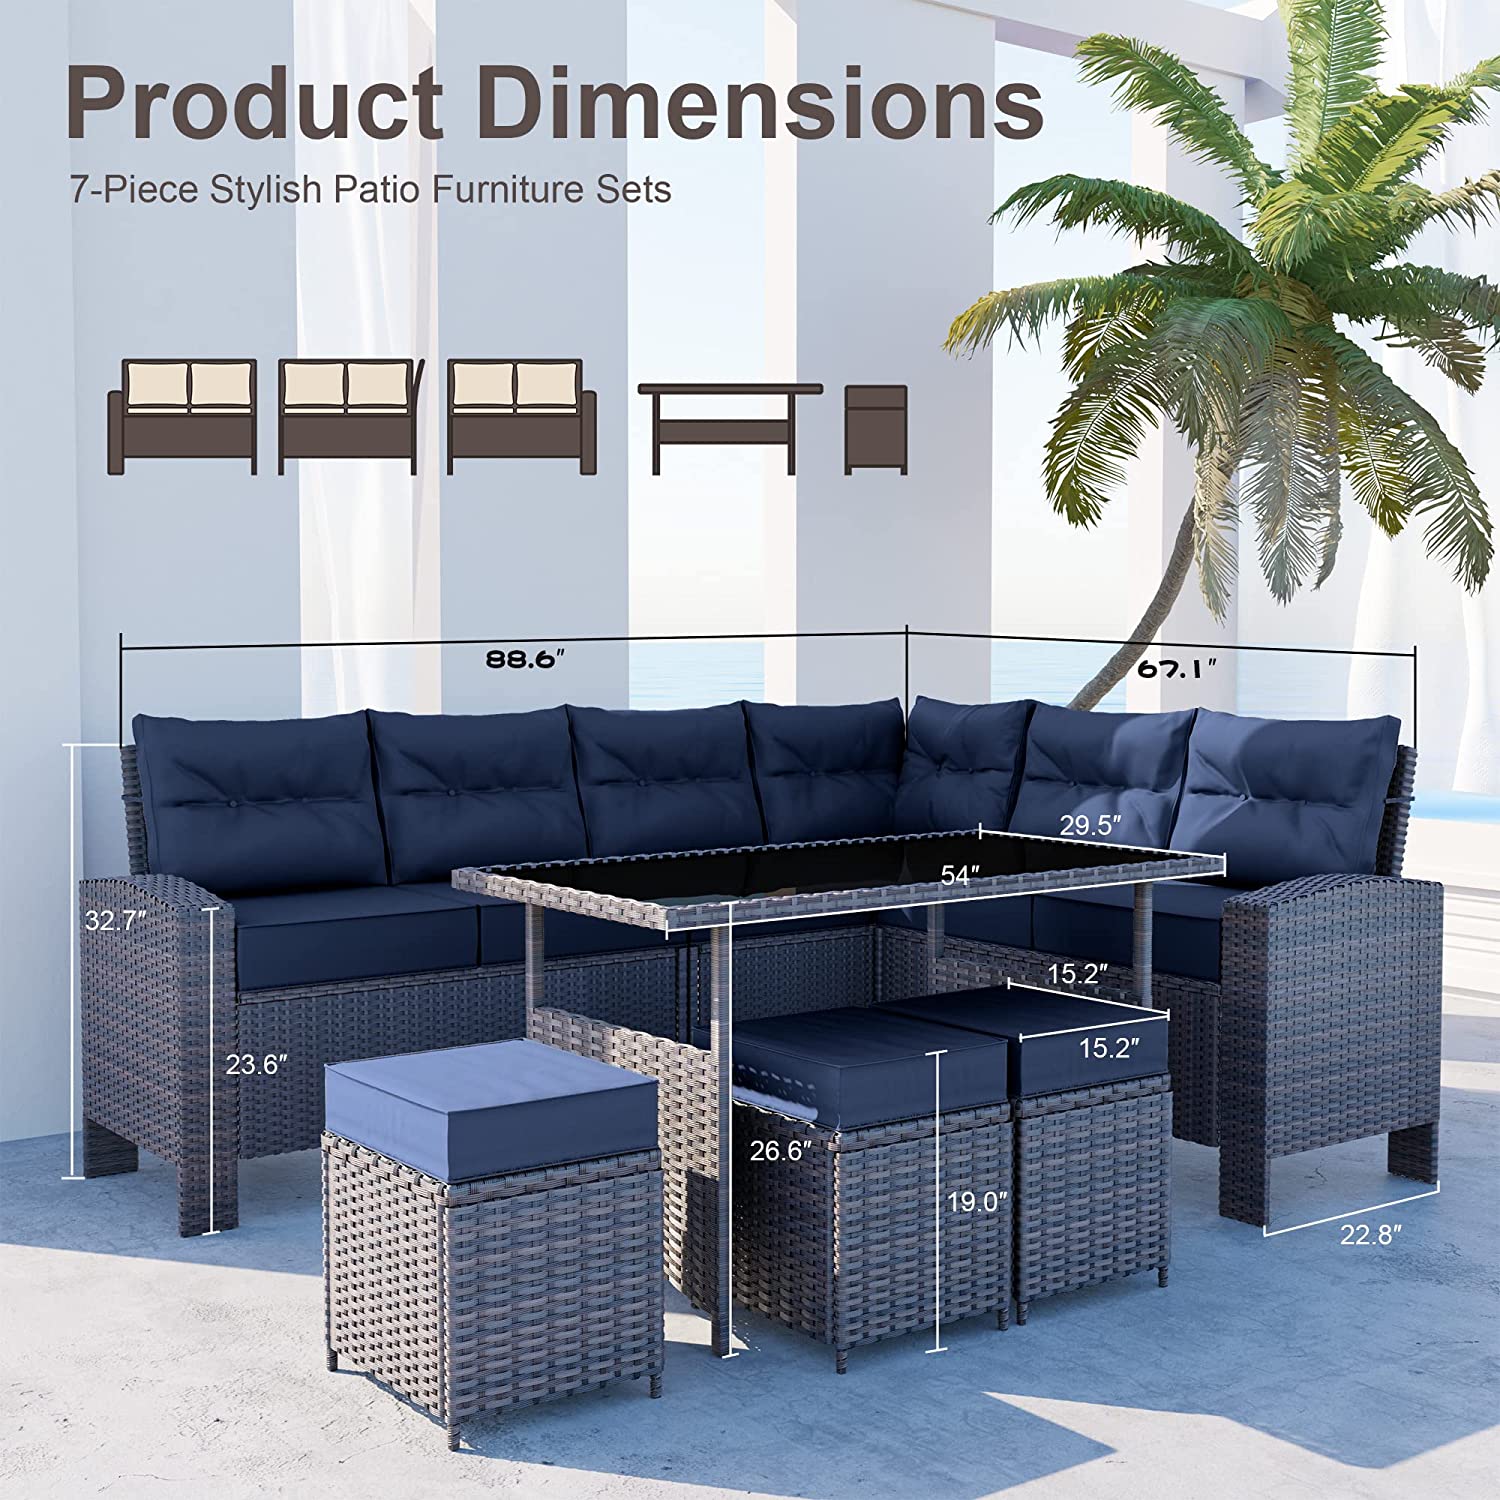 Kullavik 7 Pieces Outdoor Patio Furniture Set, All-Weather Patio Outdoor Dining Conversation Sectional Set with Coffee Table, Wicker Sofas, Ottomans, Removable Cushions,Navy Blue - image 4 of 7